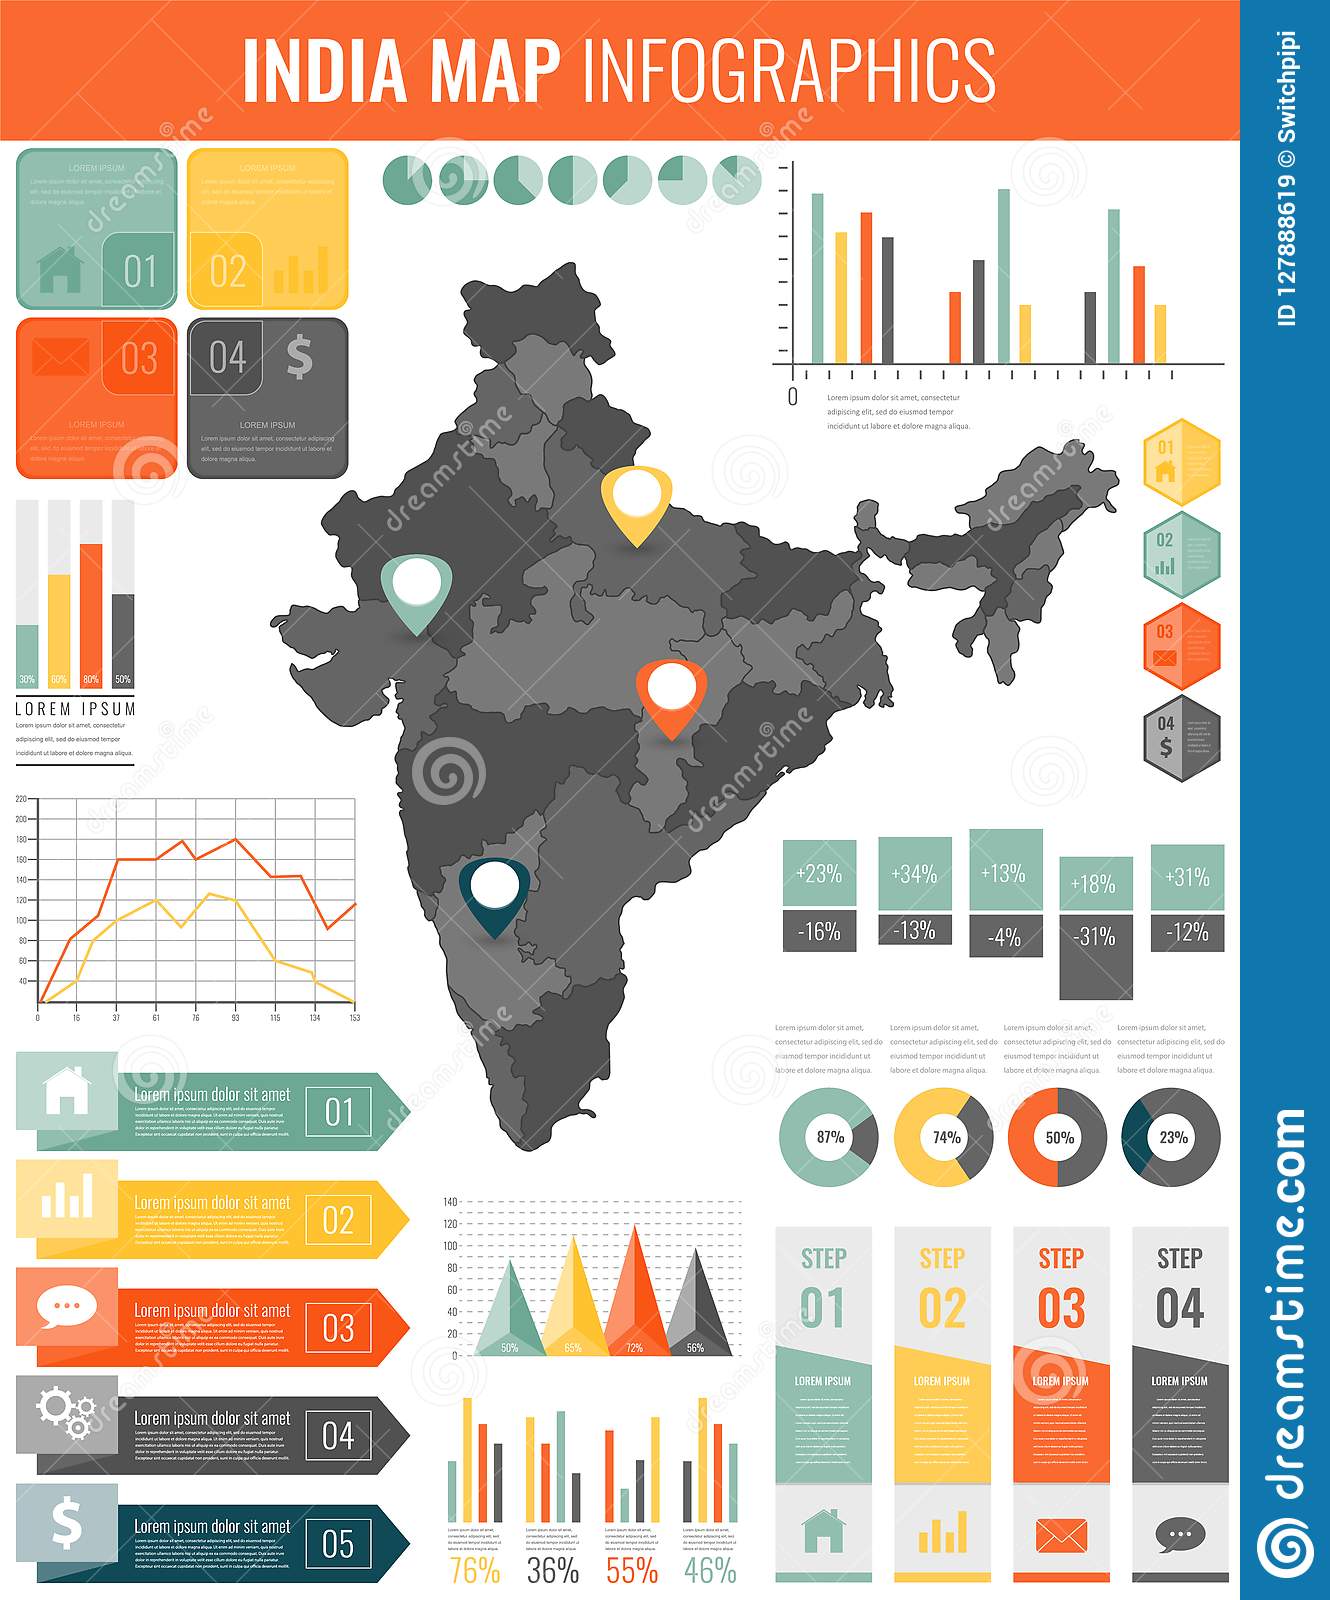 20 Fantastic Infographics On India - Infographics | Graphs.net